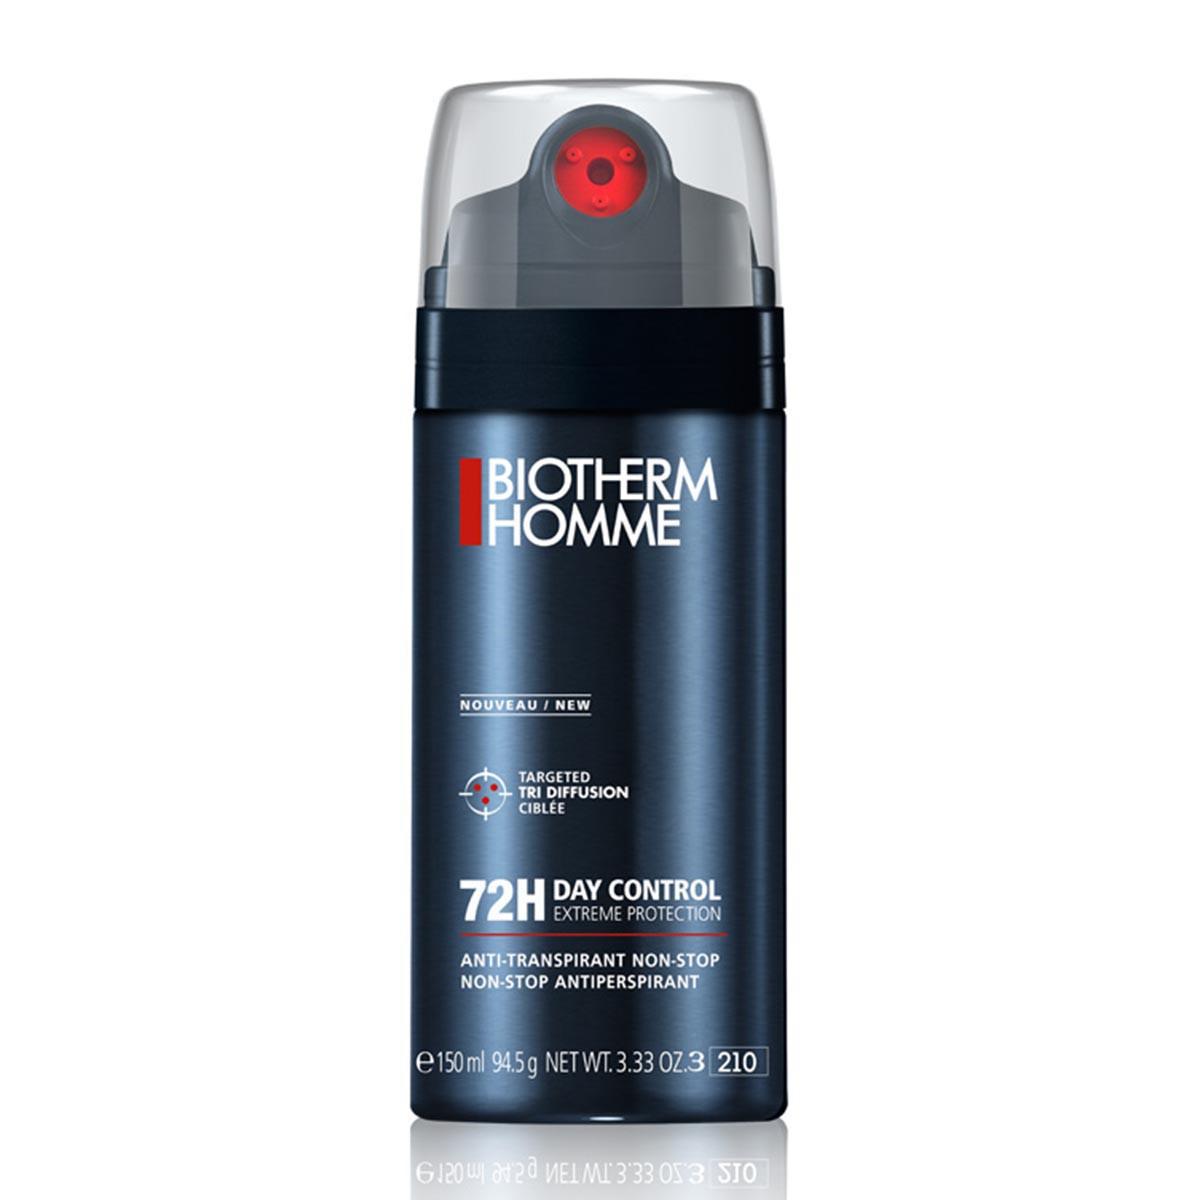 biotherm-72h-day-control-extreme-protection-day-control-extreme-protection-deodoranttisuihke-150ml